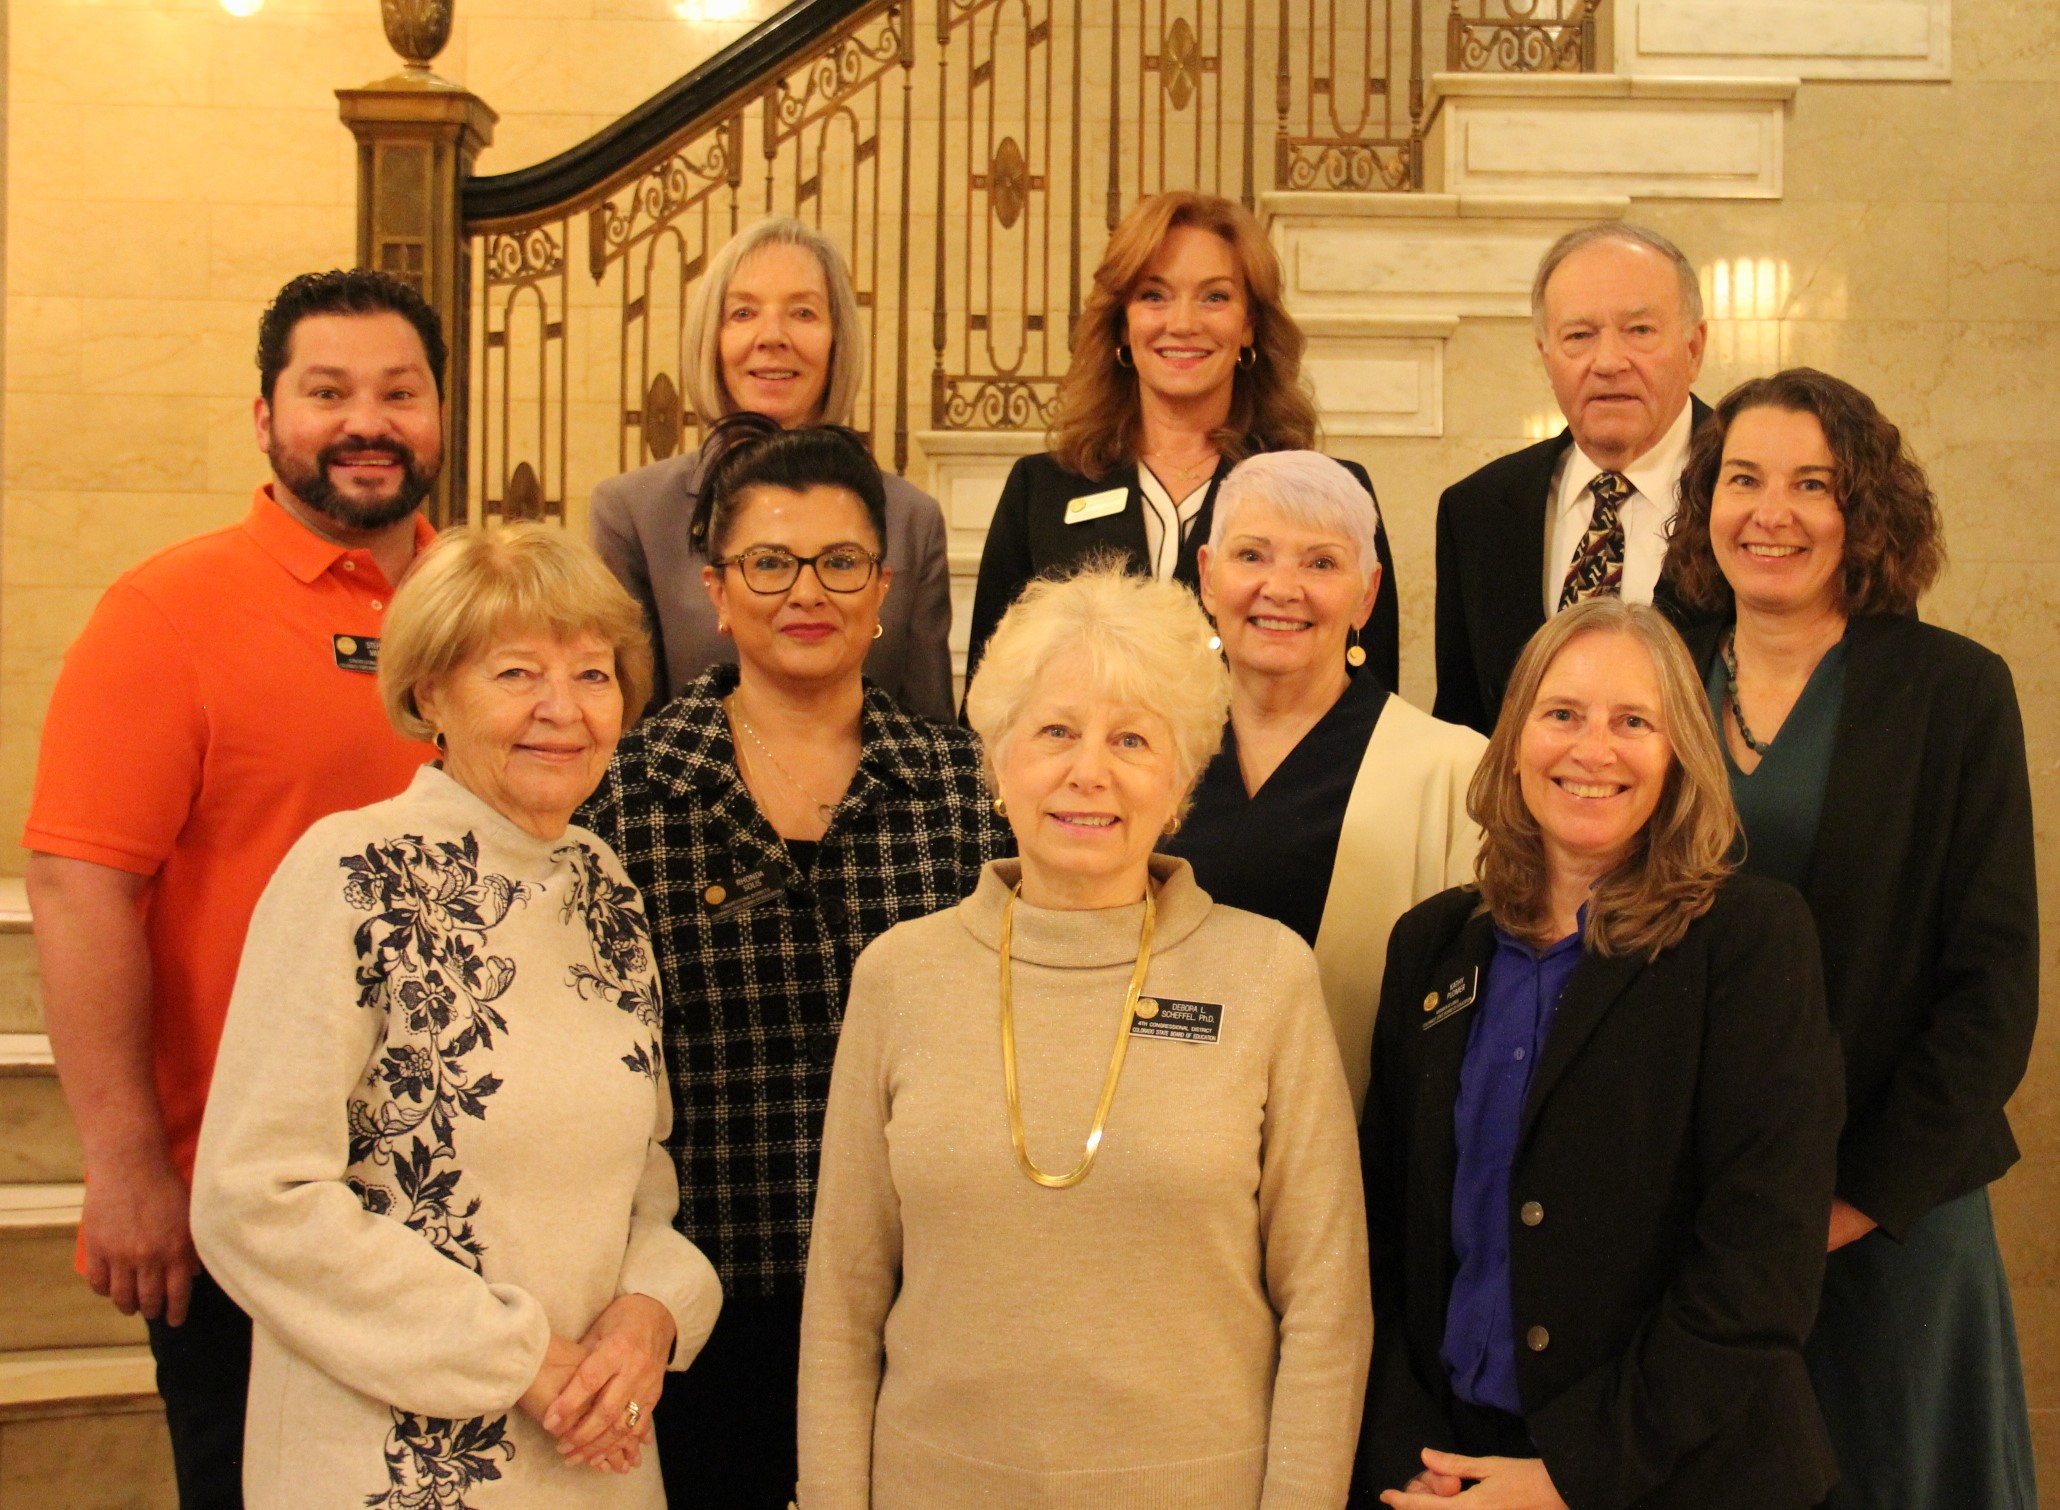 Group photo with State Board of Education members and Commissioner Katy Anthes. Taken in lobby of Colorado Department of Education 201 E Colfax building on Wednesday, March 8.